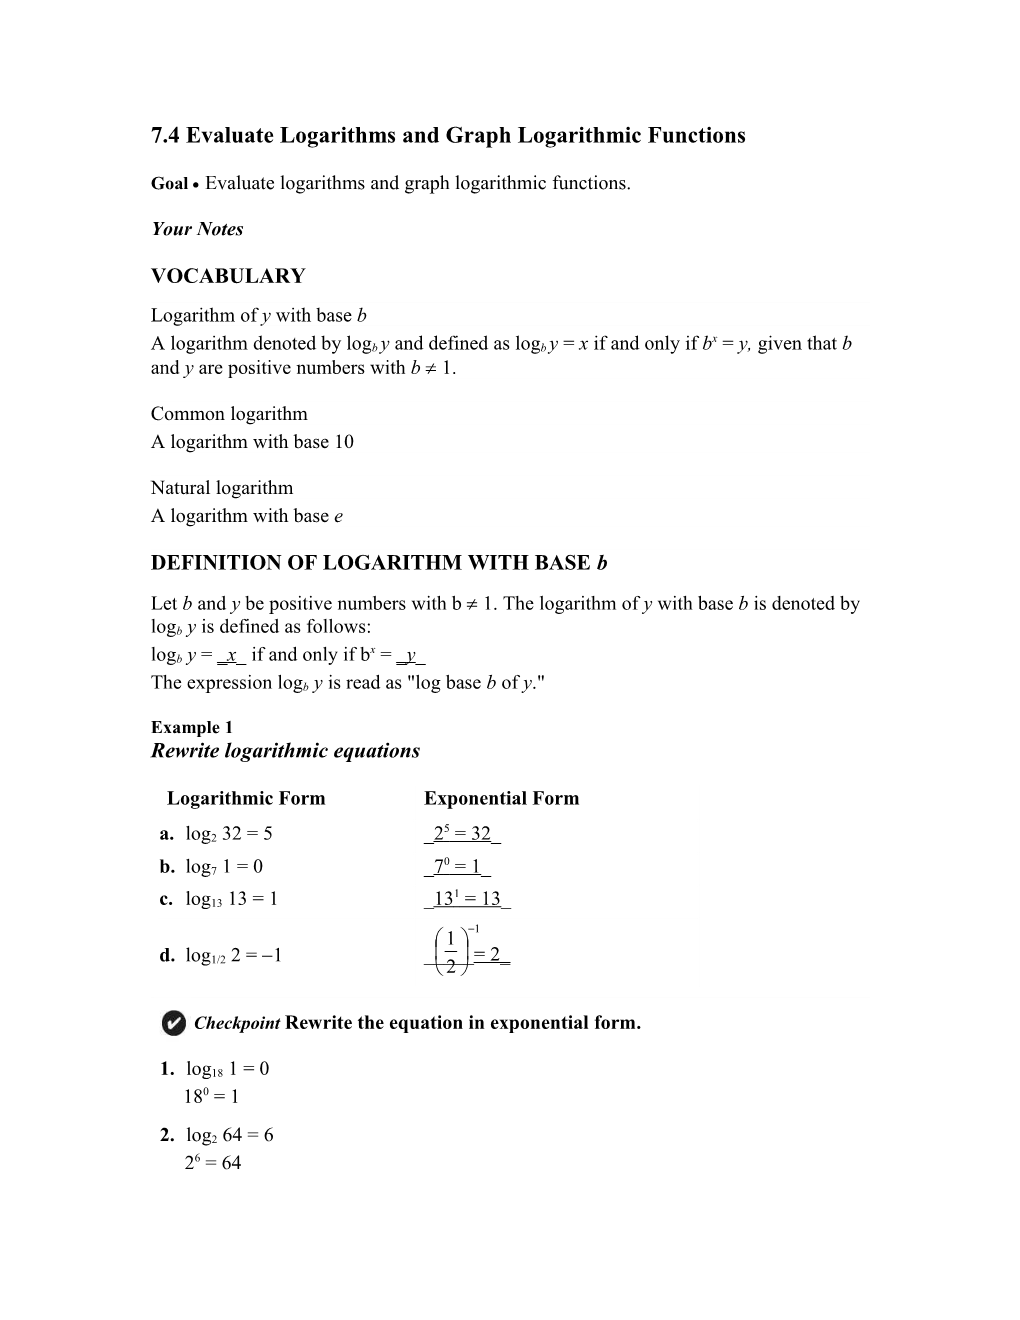 Evaluate Logarithms and Graph Logarithmic Functions